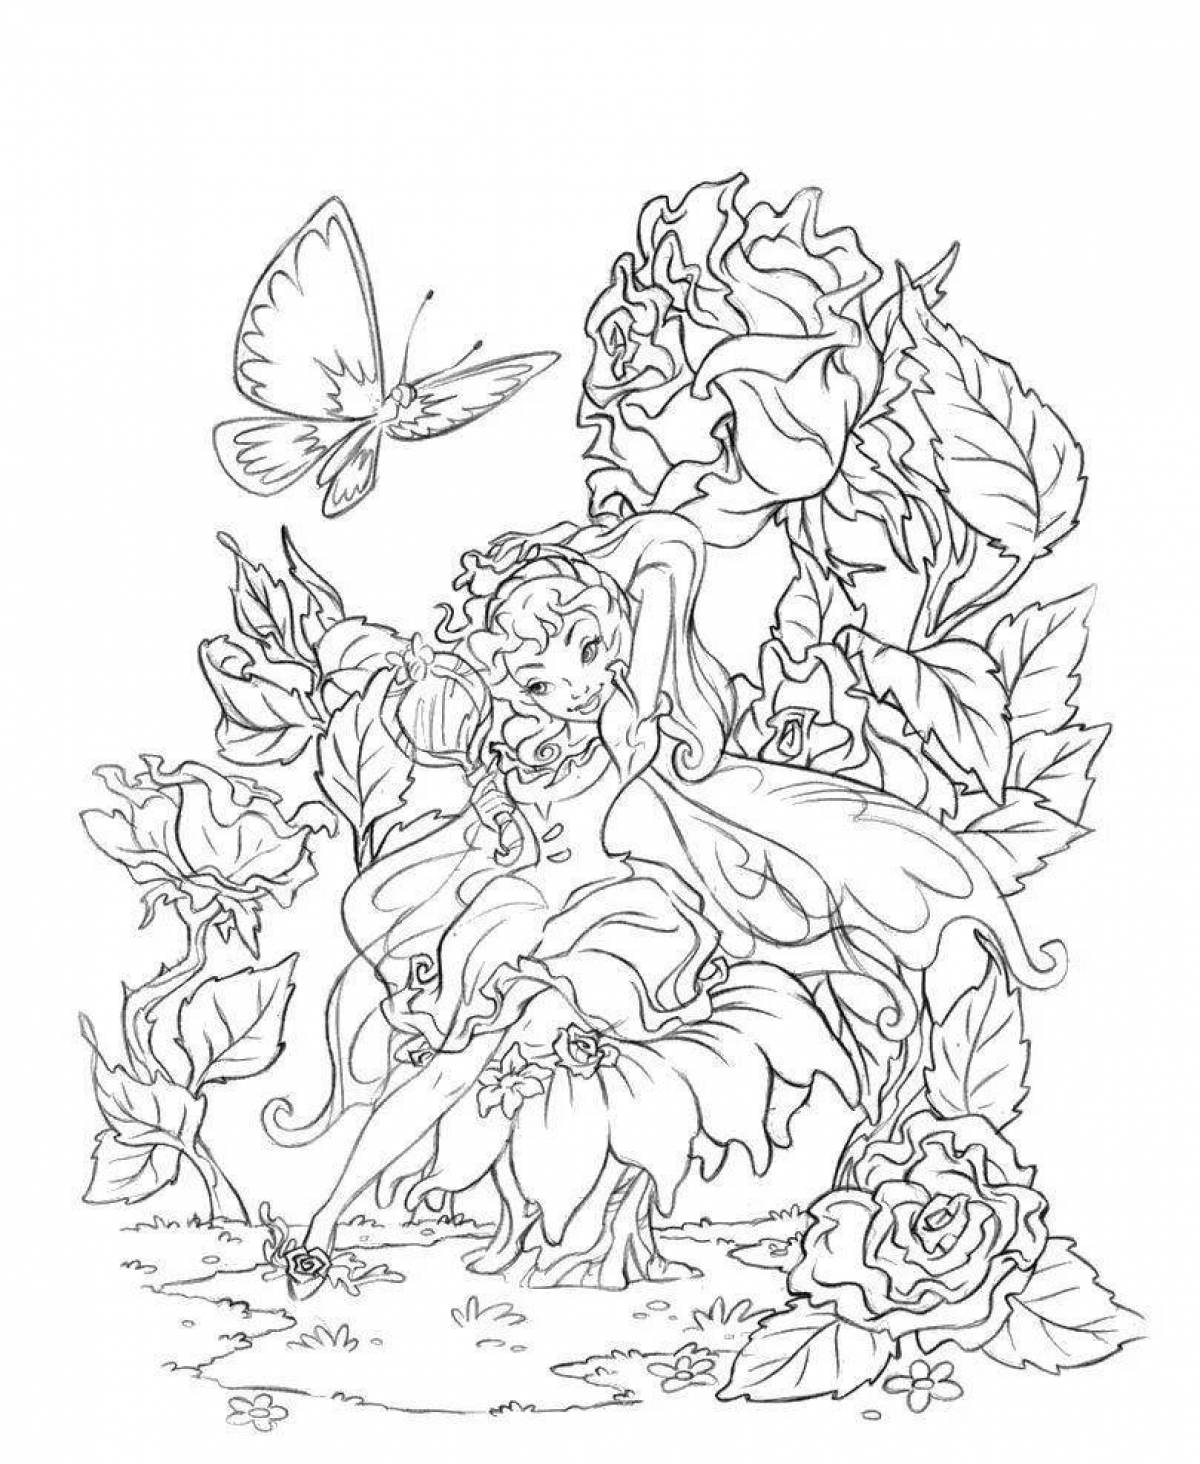 Coloring book beckoning forest fairy